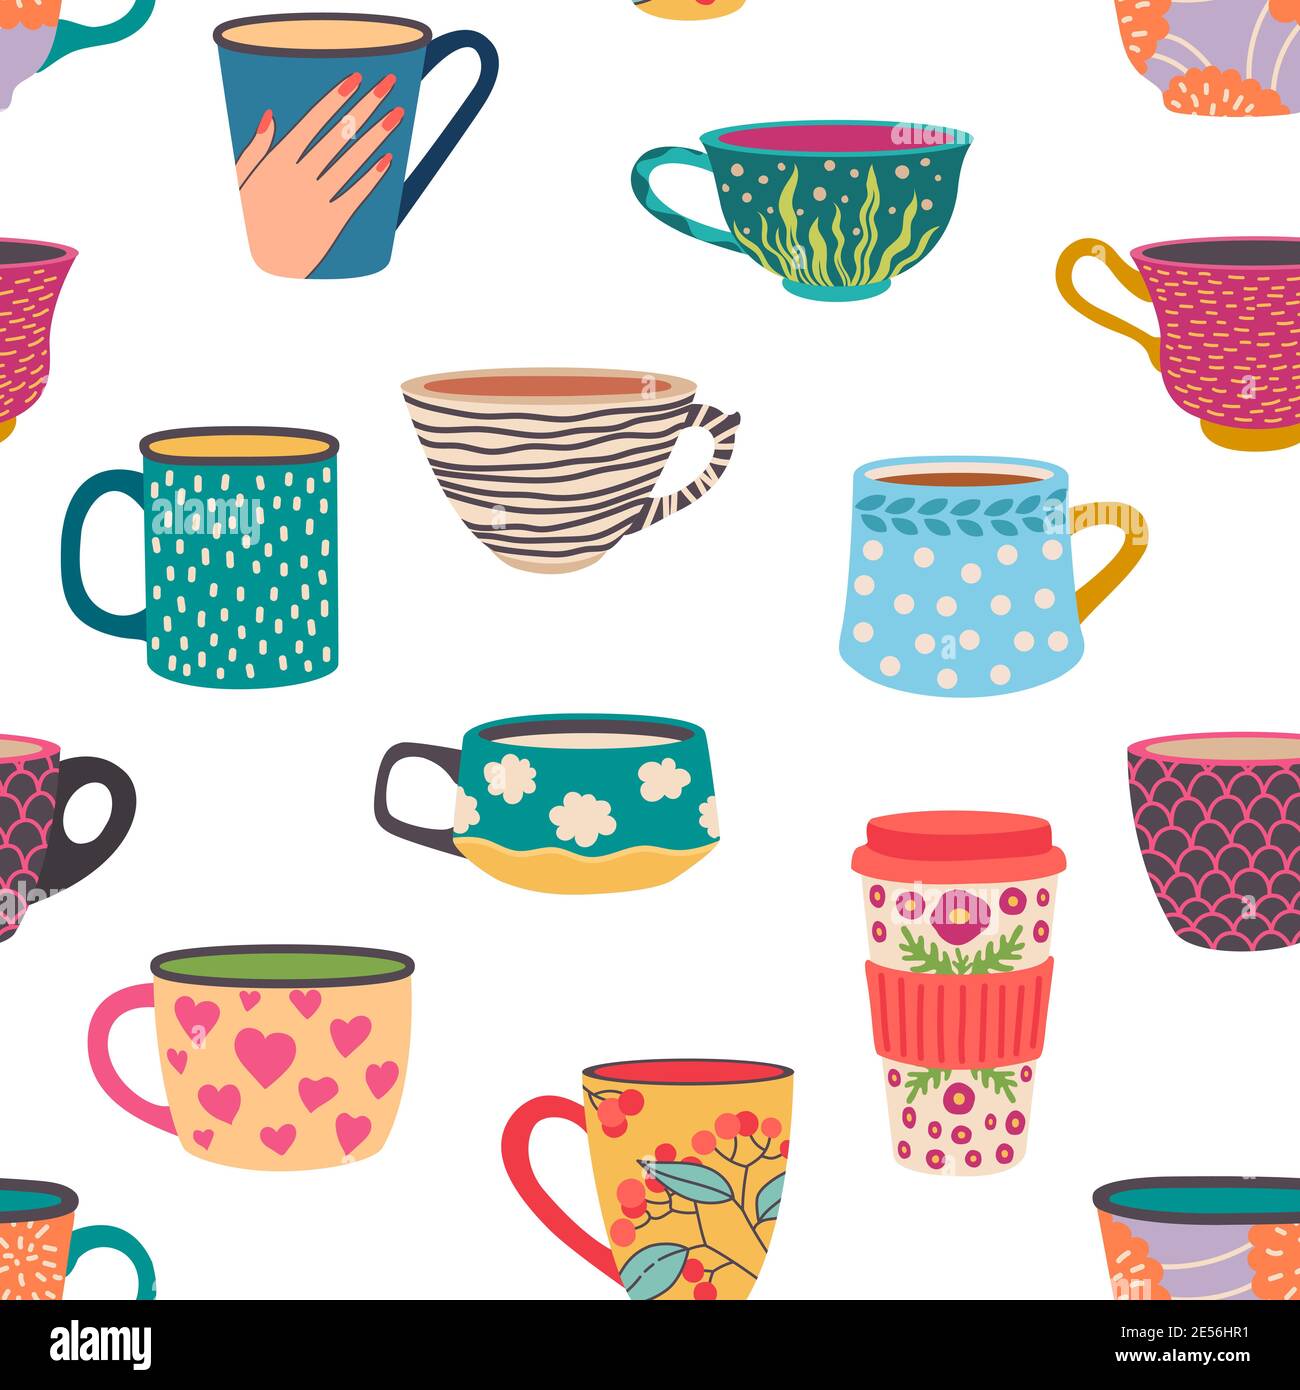 https://c8.alamy.com/comp/2E56HR1/coffee-mug-seamless-pattern-trendy-hand-drawn-tea-cups-with-ornaments-and-flowers-cozy-cafe-hot-drinks-in-mugs-wallpaper-vector-texture-2E56HR1.jpg